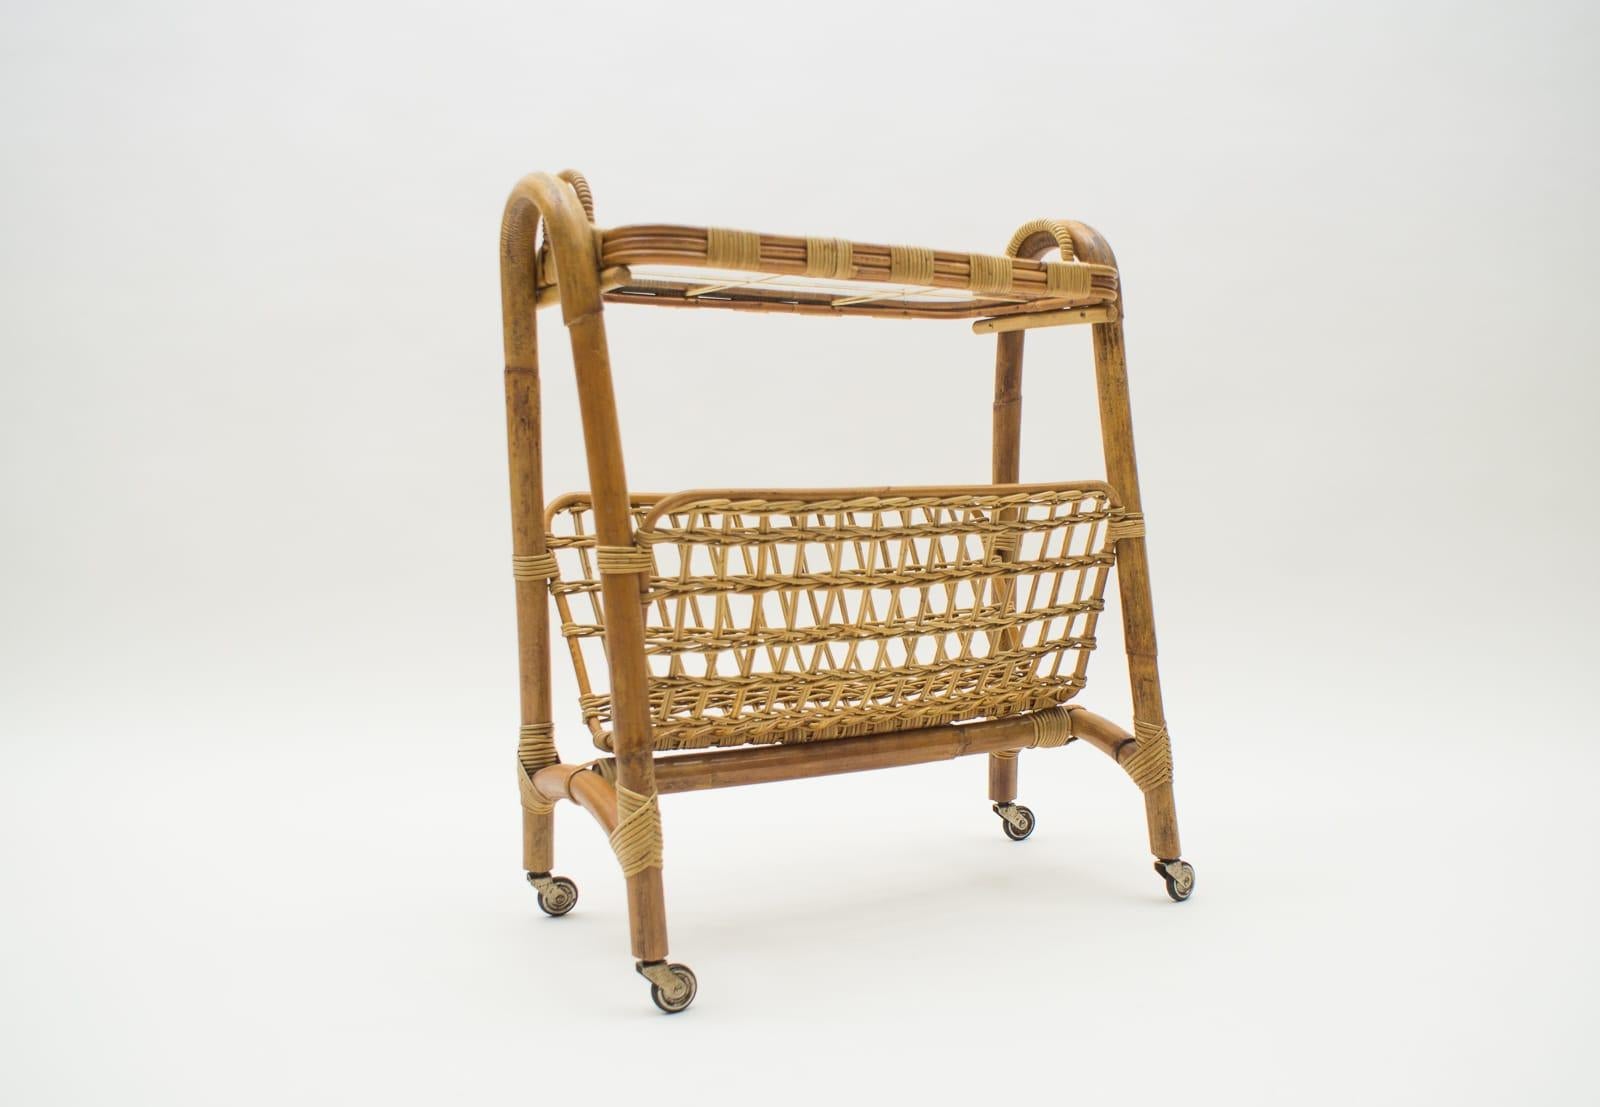 A highly decorative bamboo, rattan and glass serving trolley or bar cart, 1950s. 

Removable serving tray.

Very good vintage condition with patina and sins of usage.